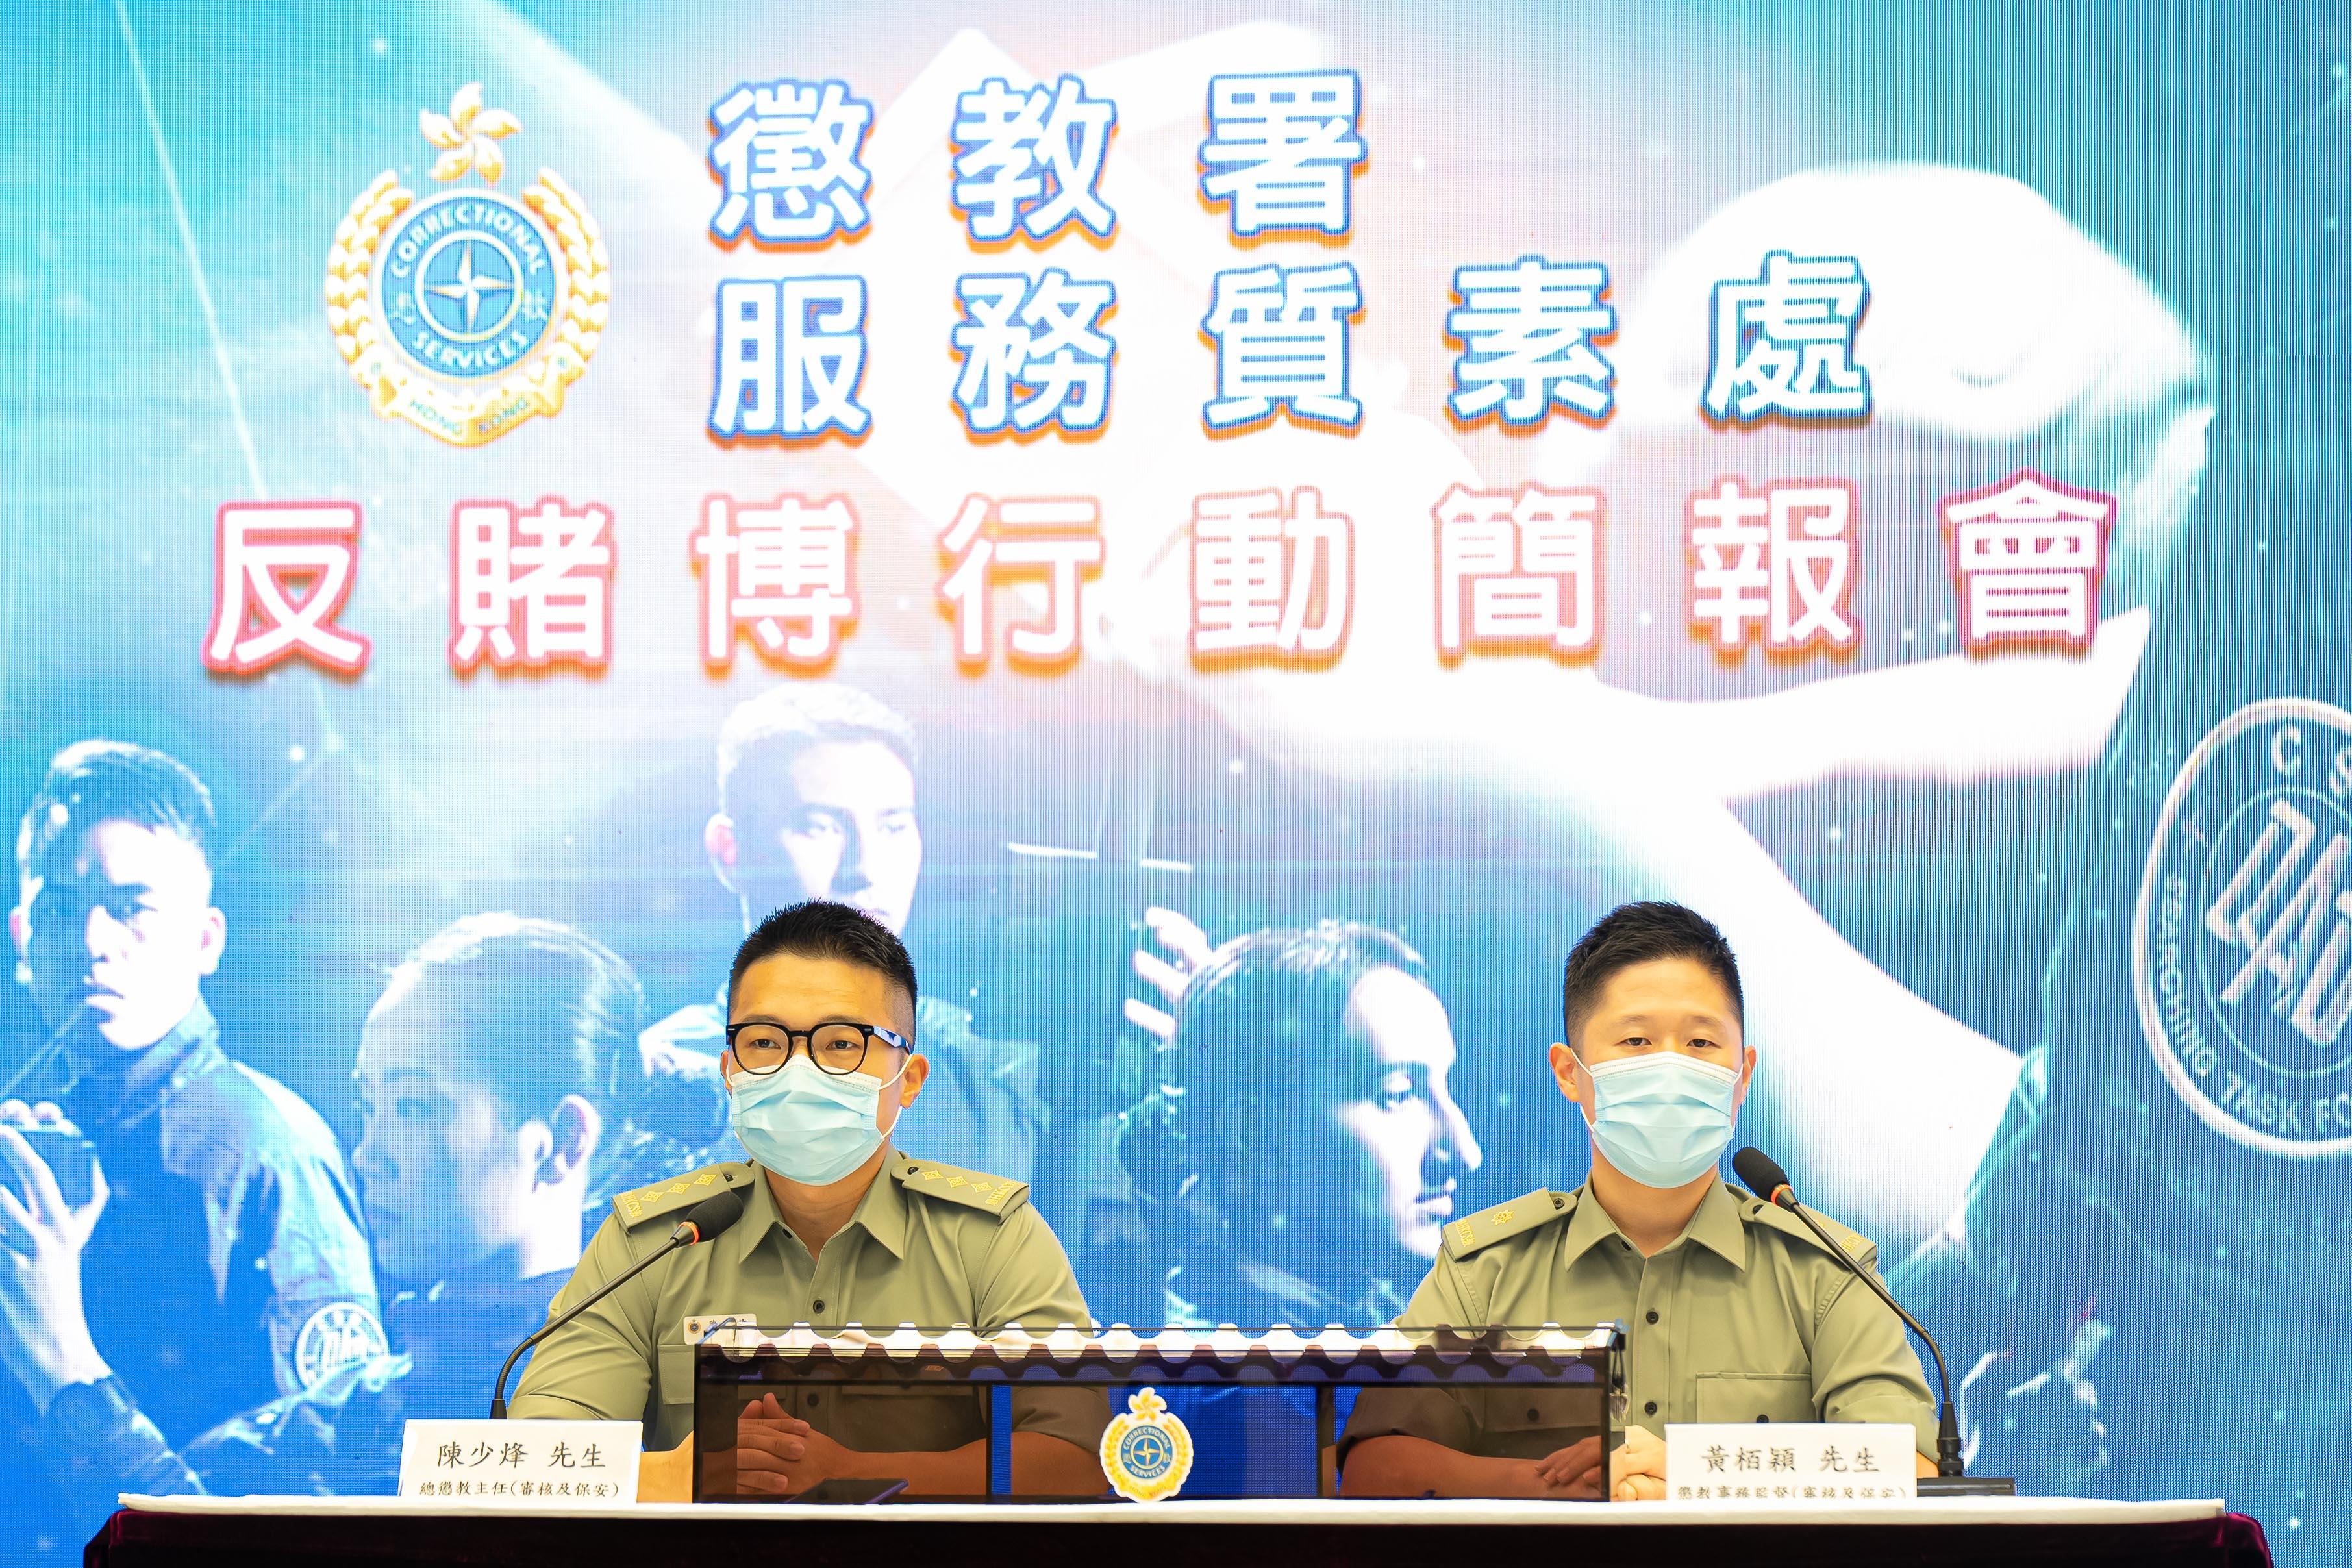 The Correctional Services Department held a press briefing on its anti-gambling operations ahead of World Cup 2022 today (November 18). Photo shows the department's Superintendent (Inspectorate and Security) Mr Wong Pak-wing (right) and Chief Officer (Inspectorate and Security) Mr Chen Siu-fung (left) introducing various anti-gambling measures and operations conducted in correctional institutions.